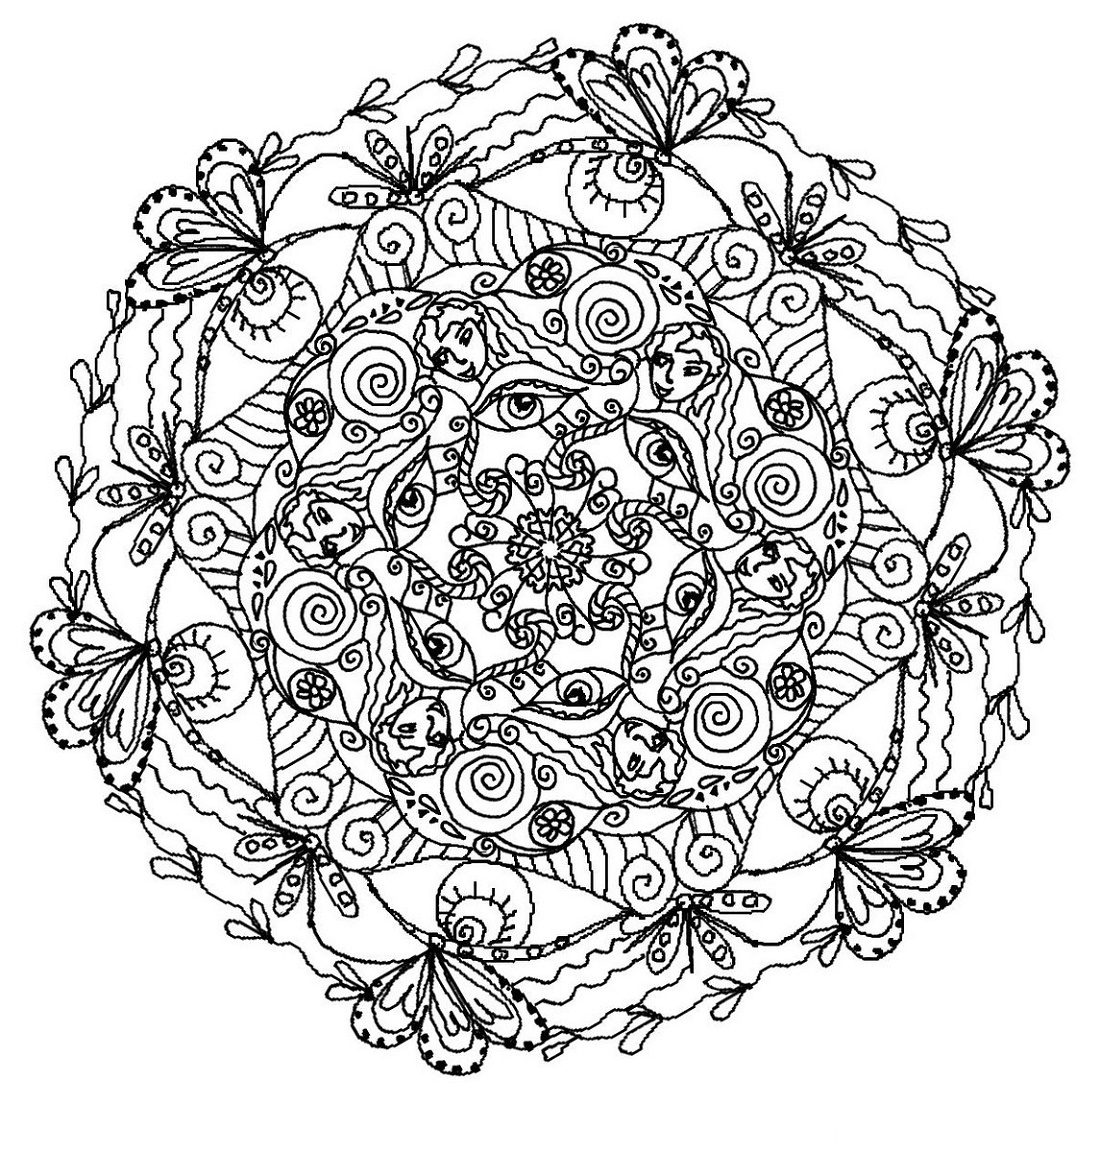 Free Mandala Coloring Pages For Adults